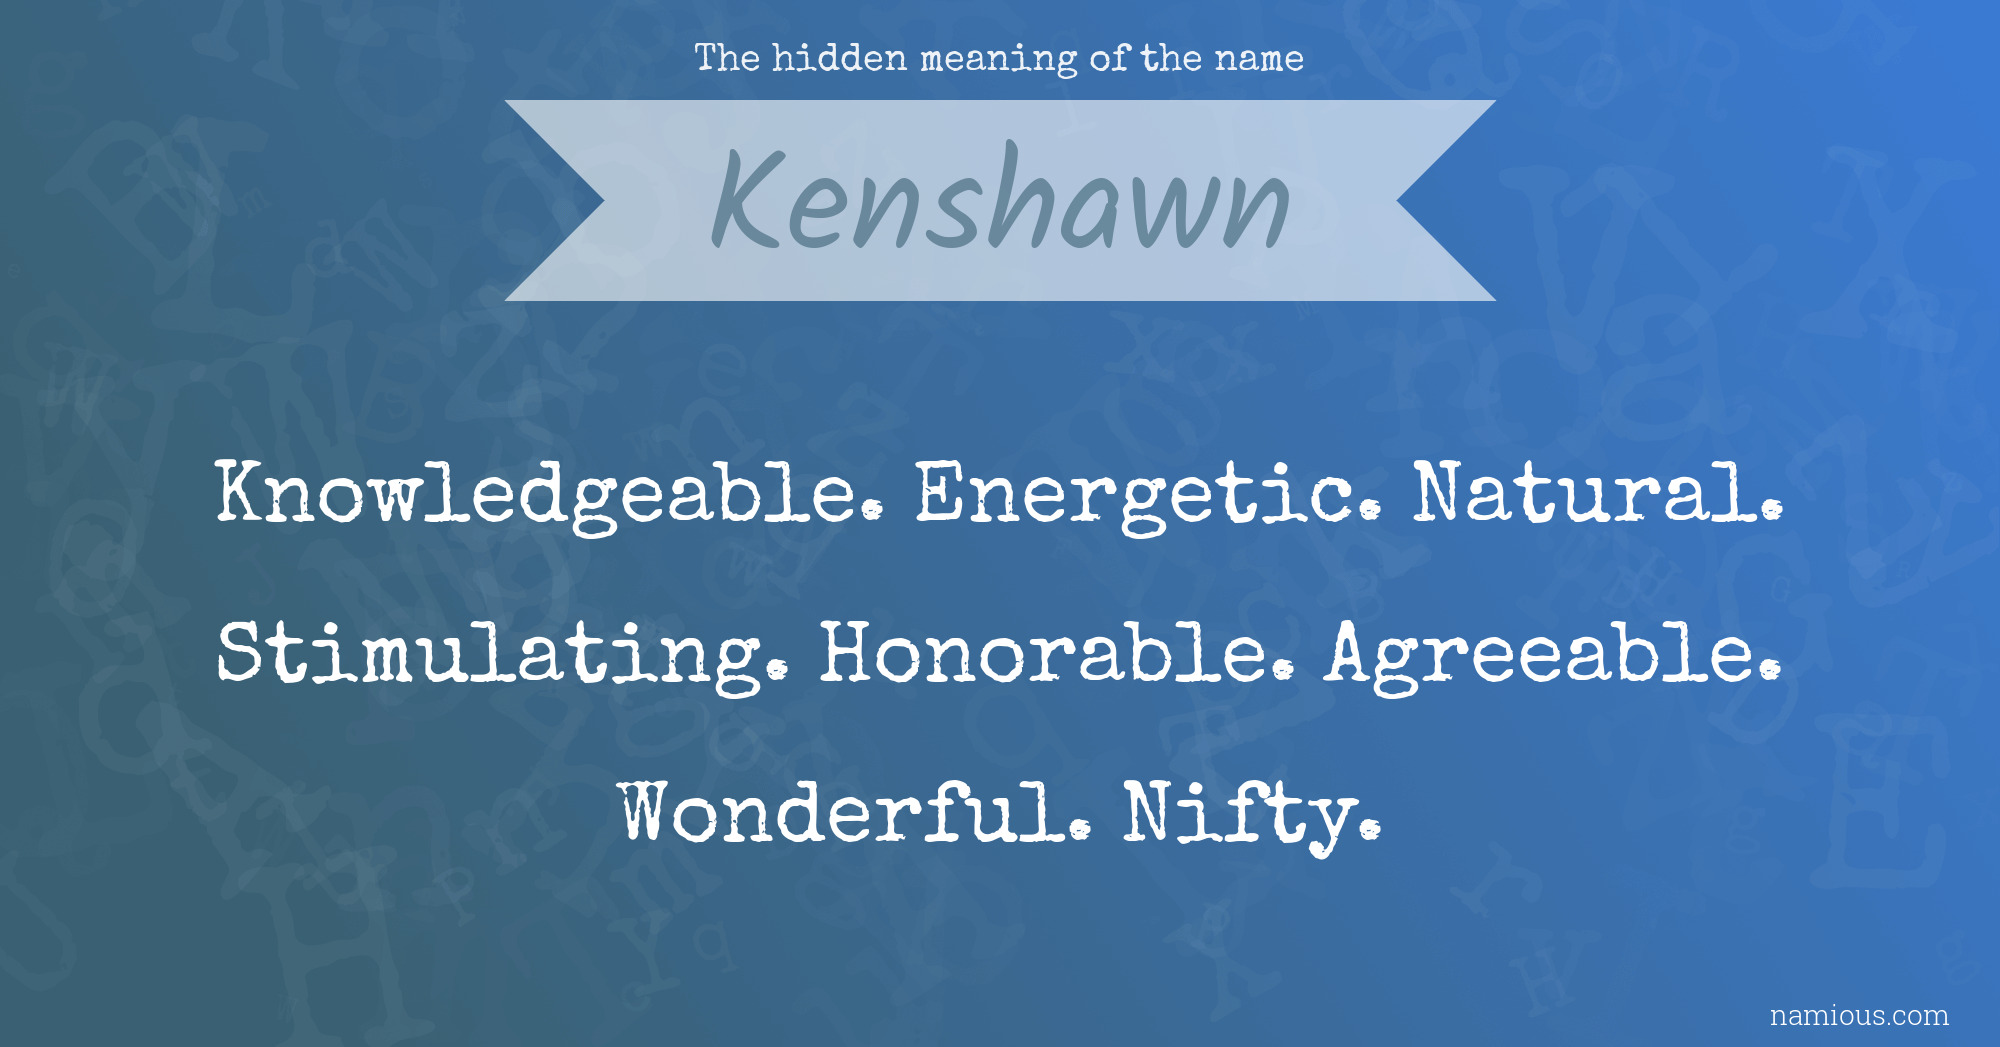 The hidden meaning of the name Kenshawn